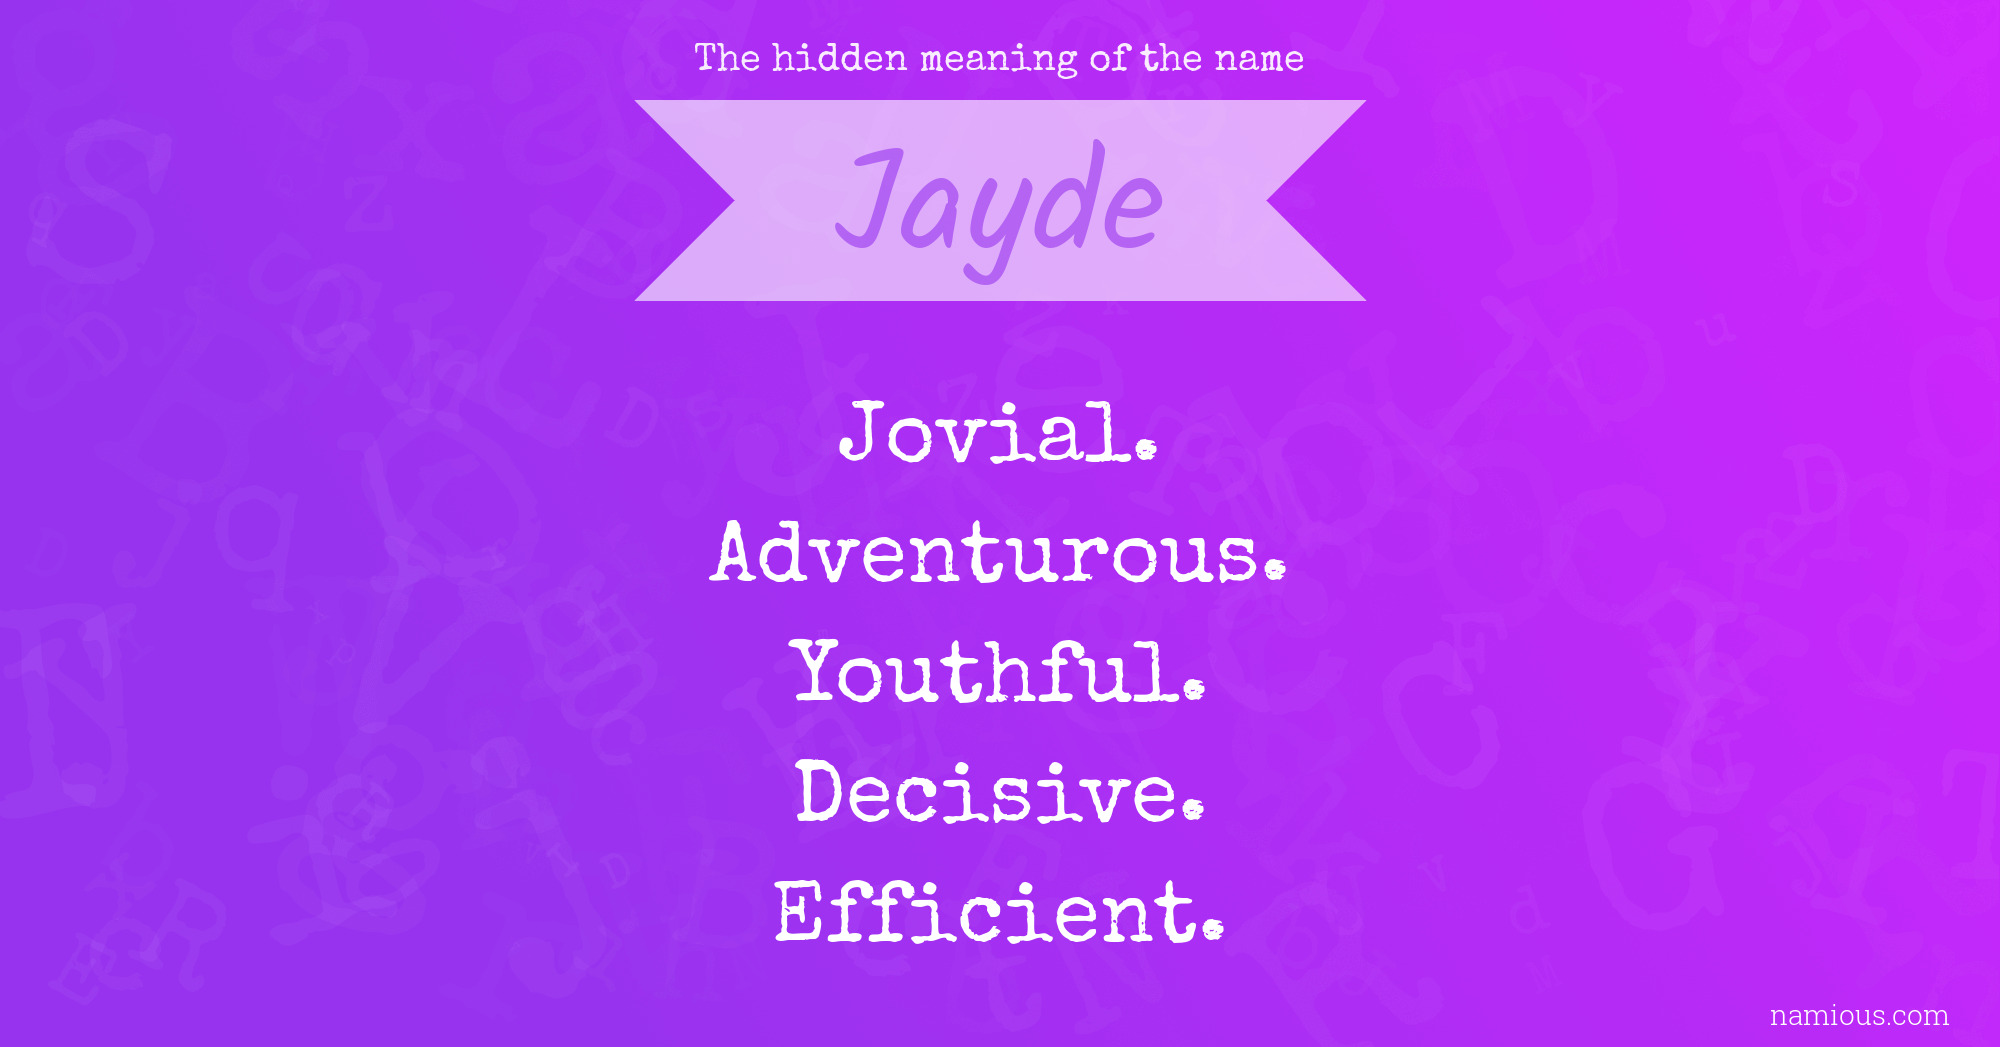 The hidden meaning of the name Jayde